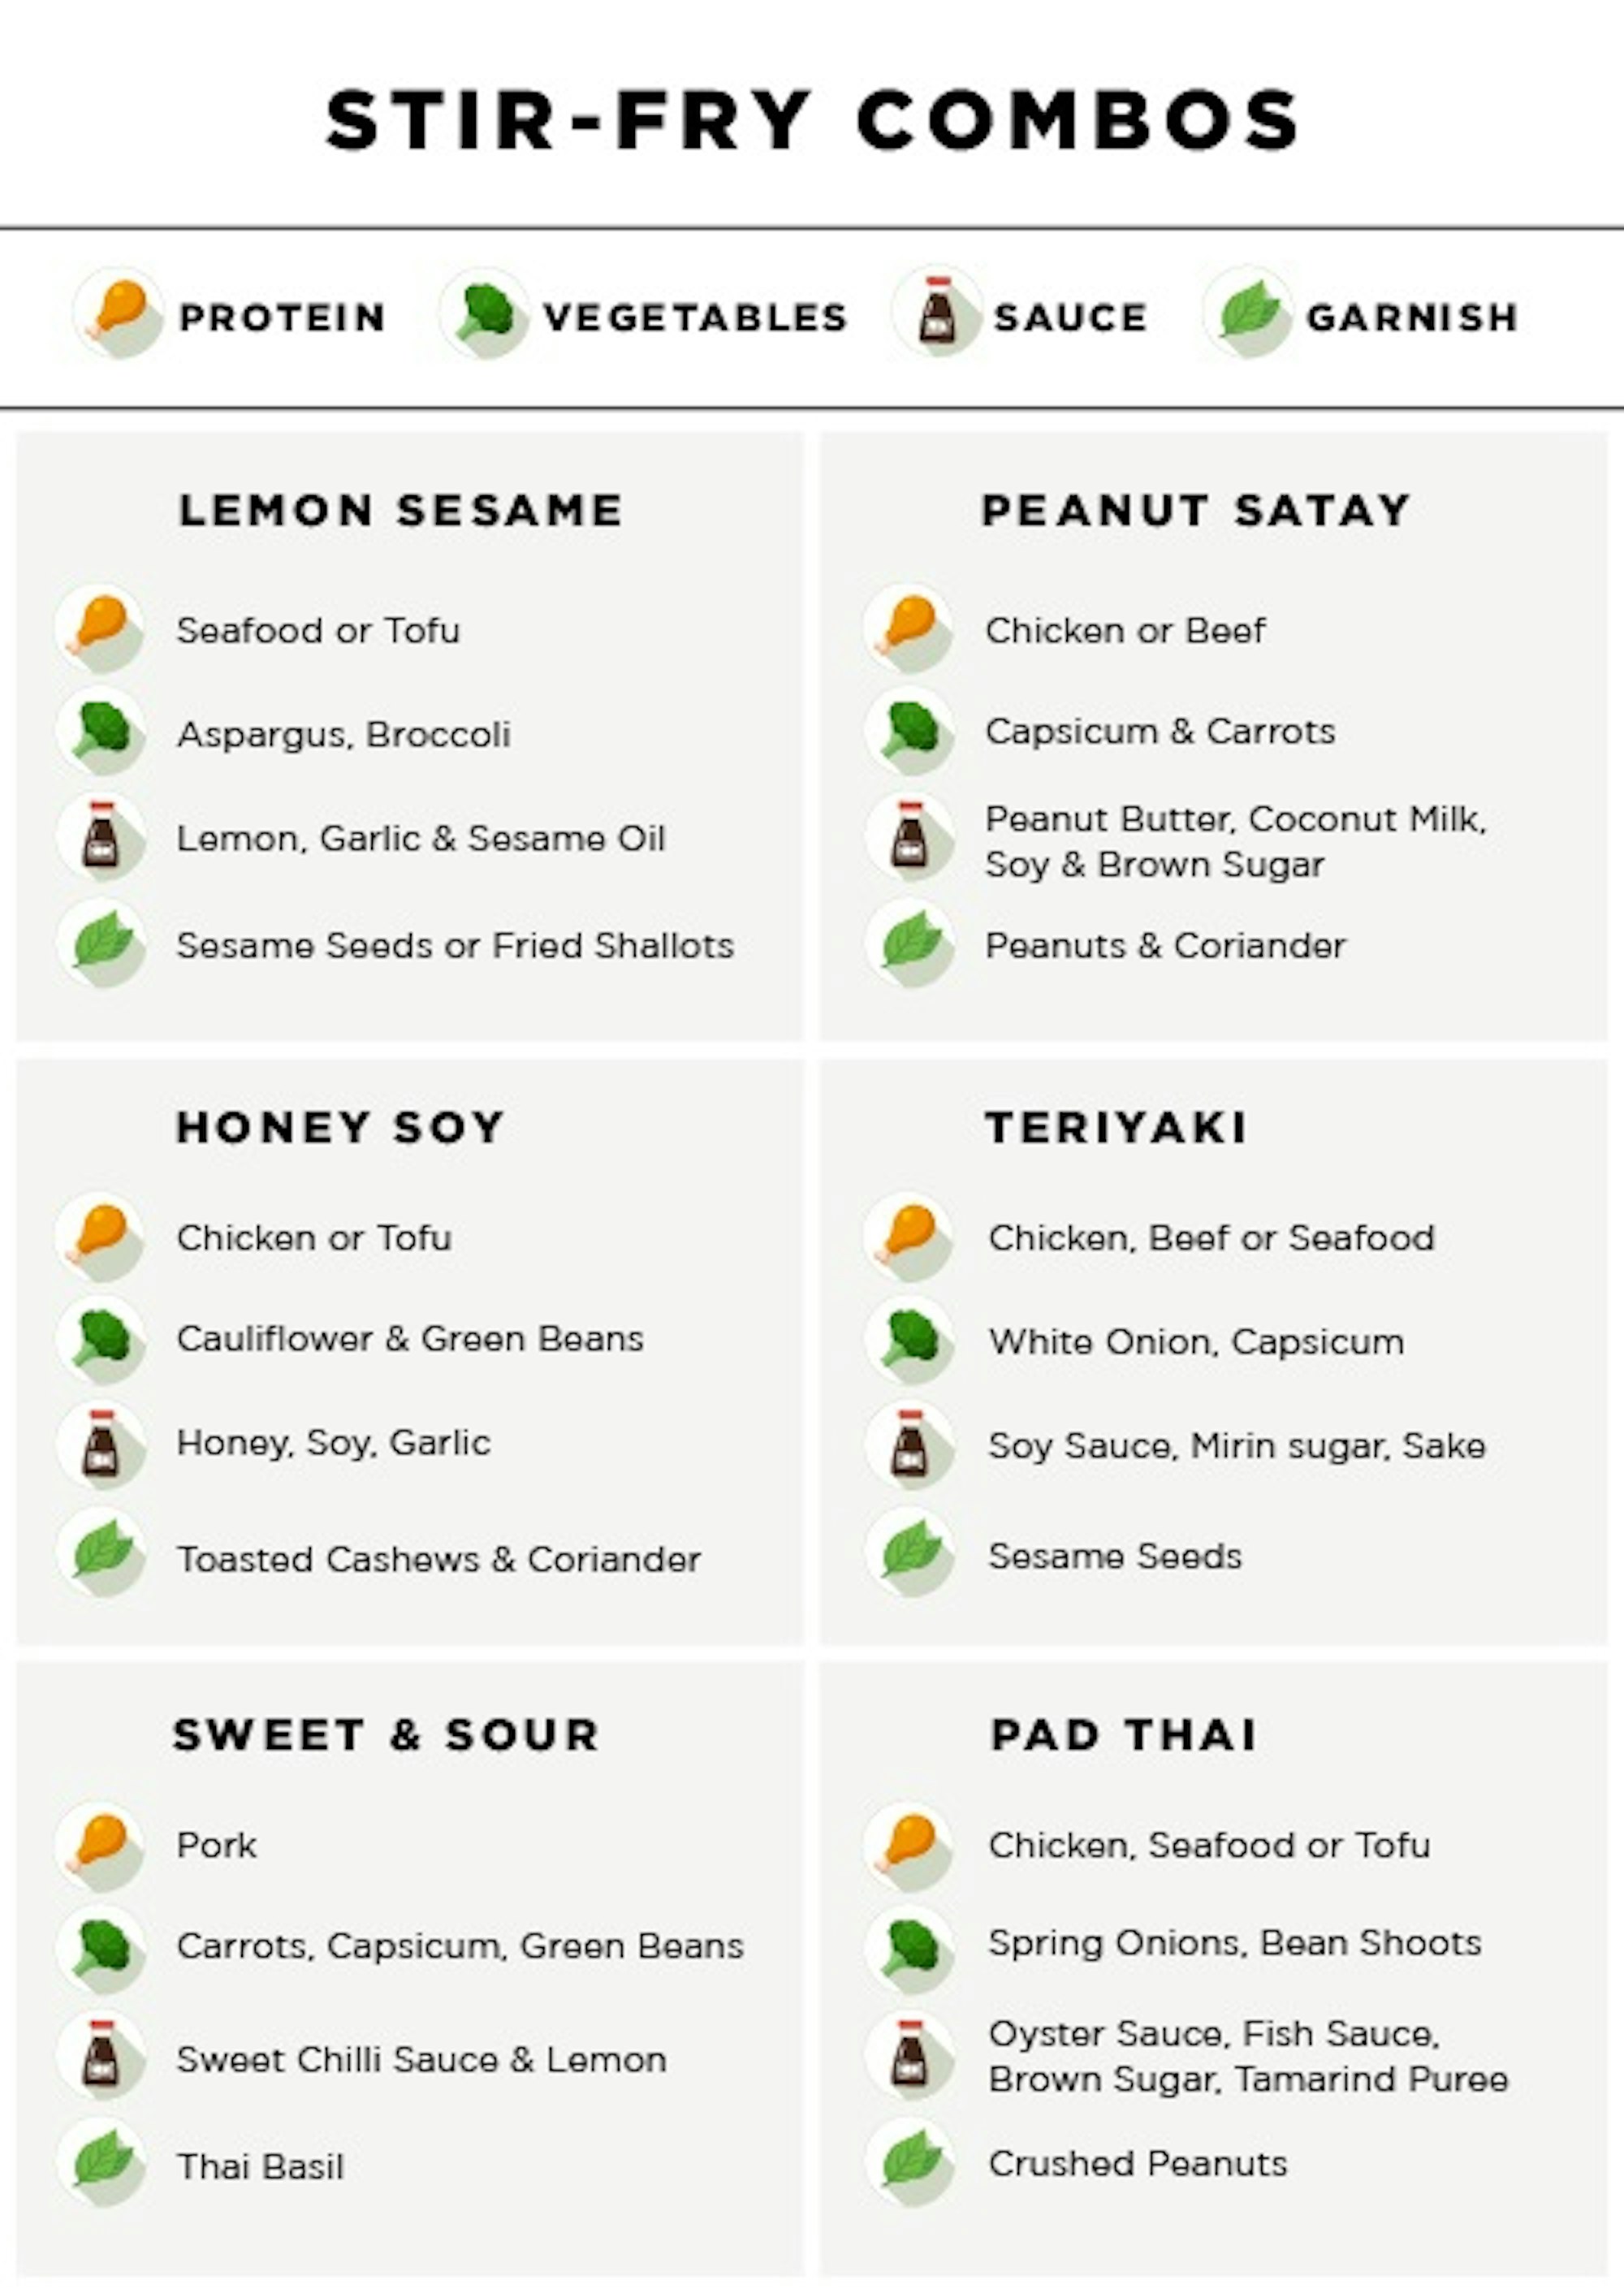 classic stir-fry combinations infographic - Robin Kitchen Blog - In The Kitchen